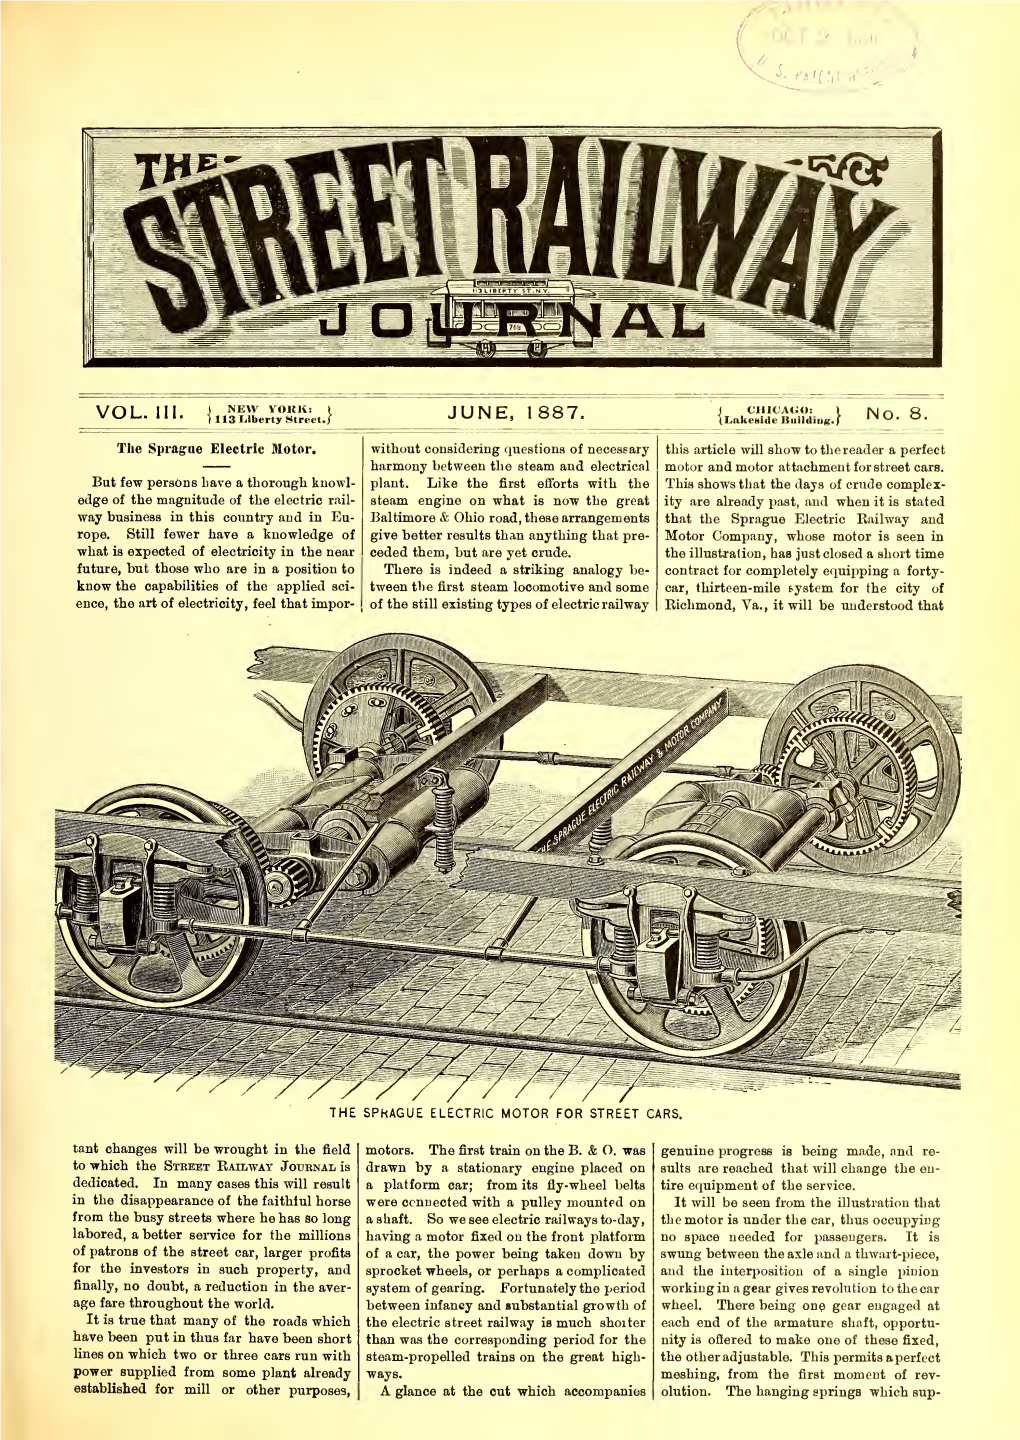 The Street Railway Journal Is Drawn by a Stationary Engine Placed on Sults Are Reached That Will Change the En- Dedicated